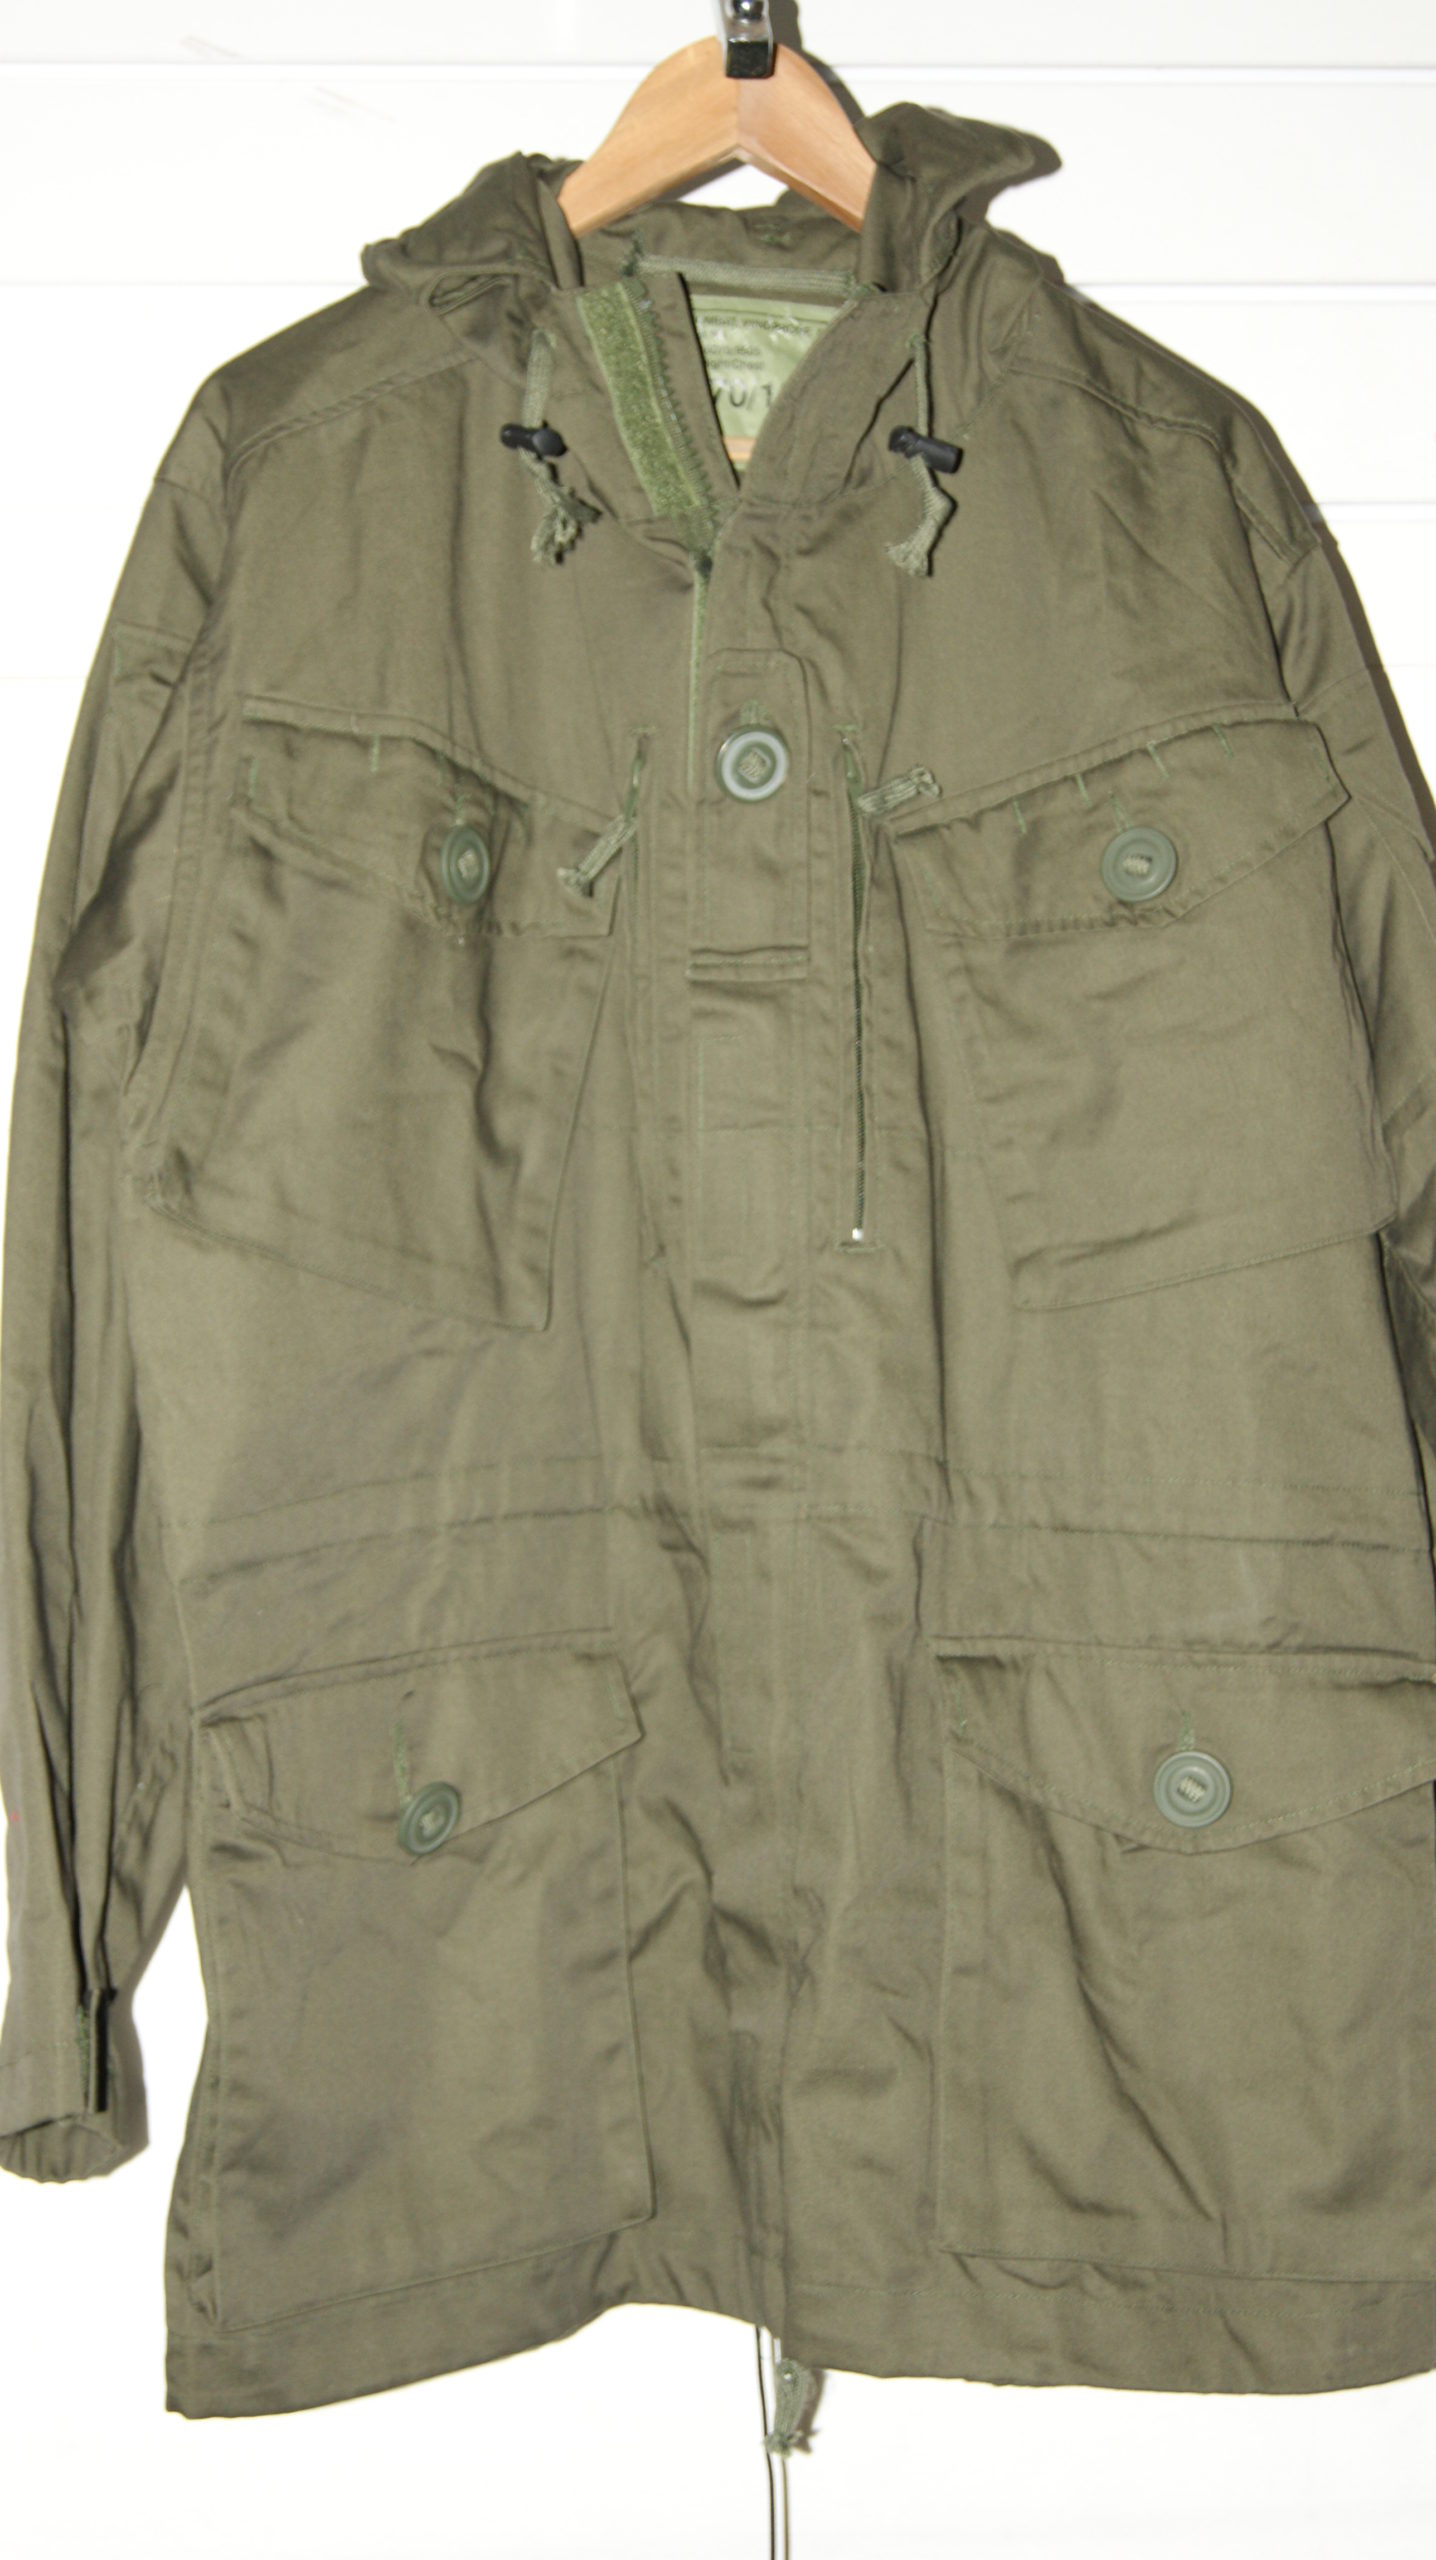 British Army Olive Green Smock New 170/104 - Army Shop